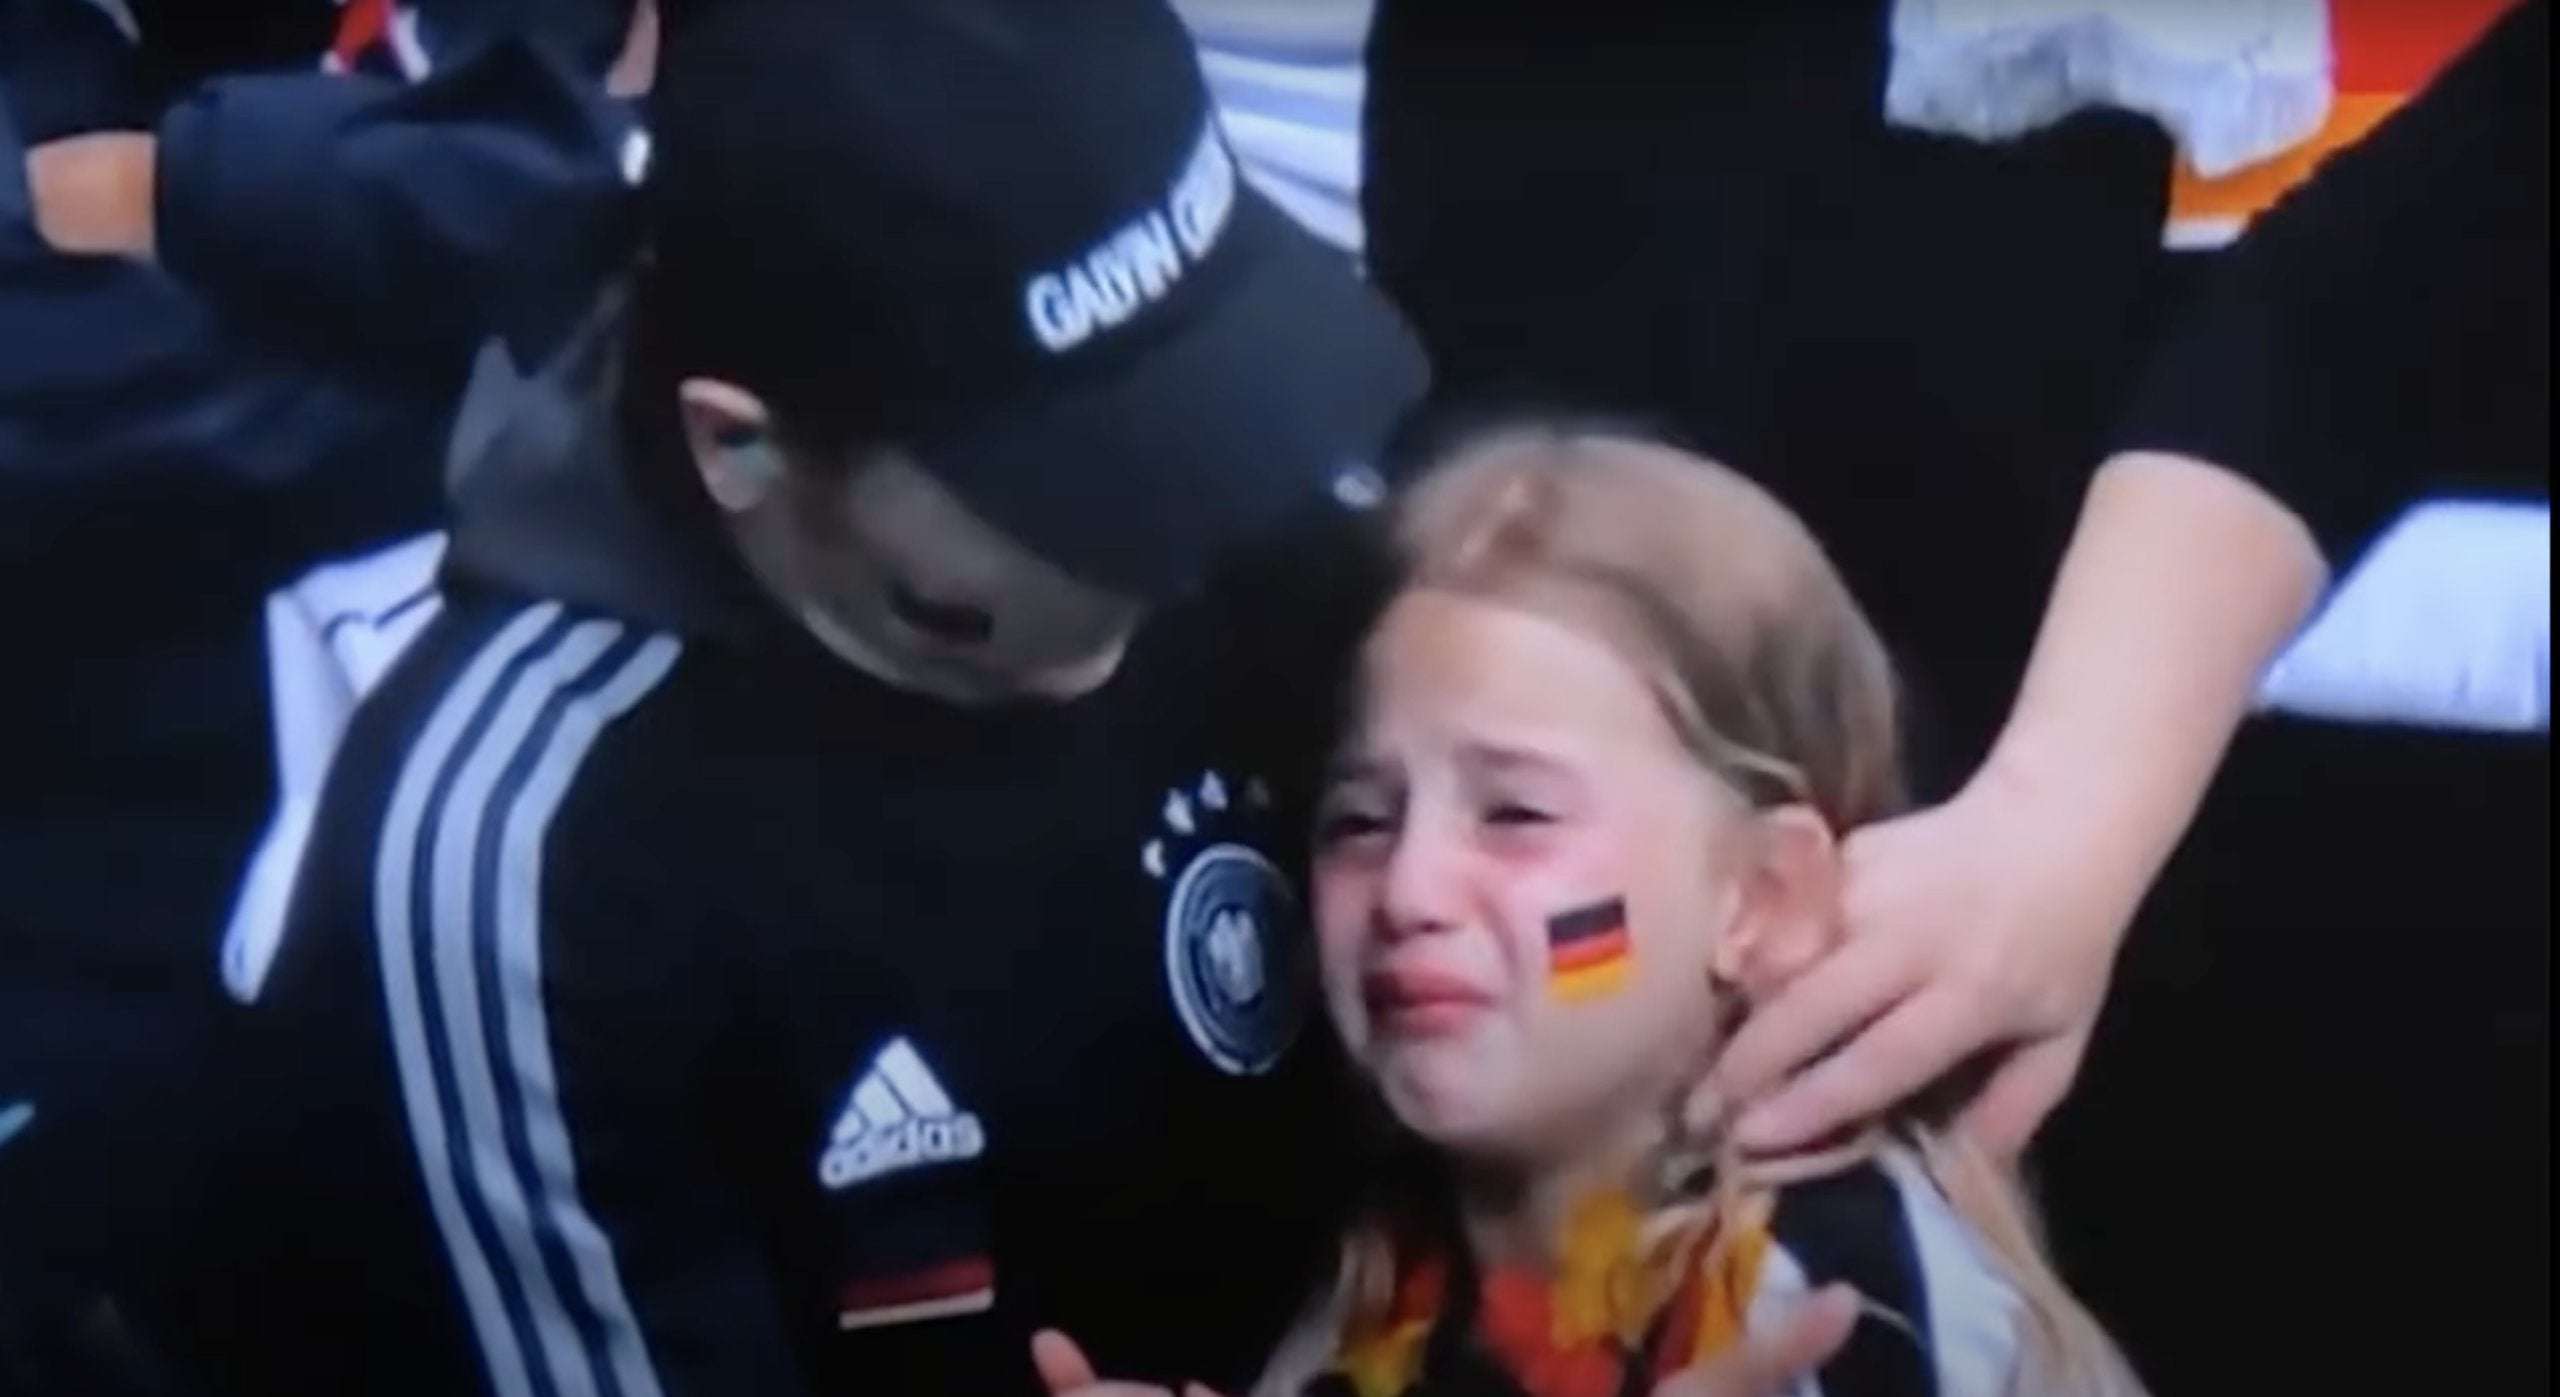 image for Over £25,000 has been raised for the crying German girl who was trolled during the Euros